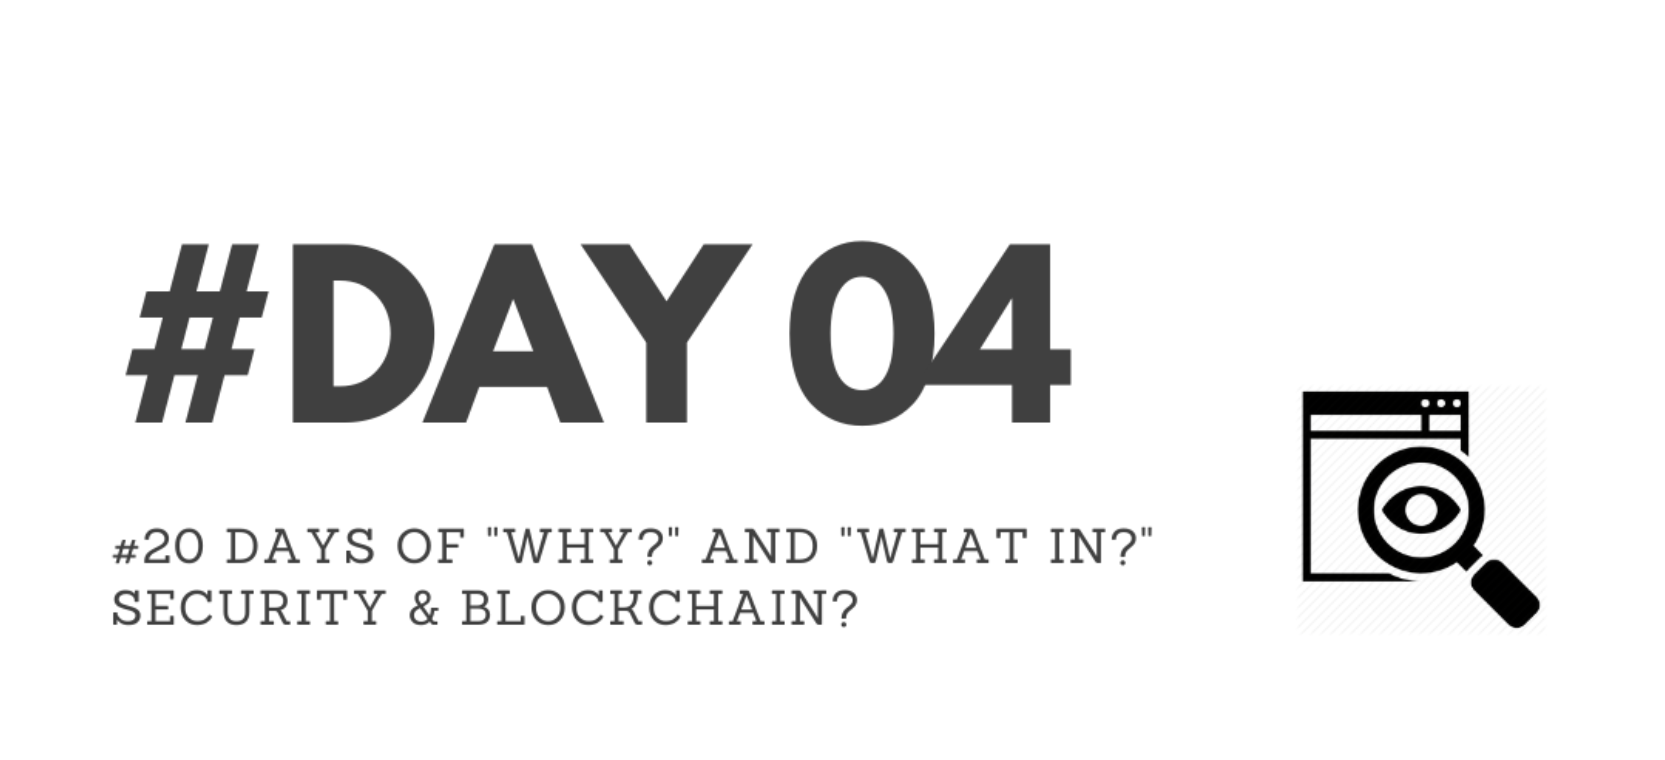 Day04 - "Why?" & "What in?" Security & Blockchain?